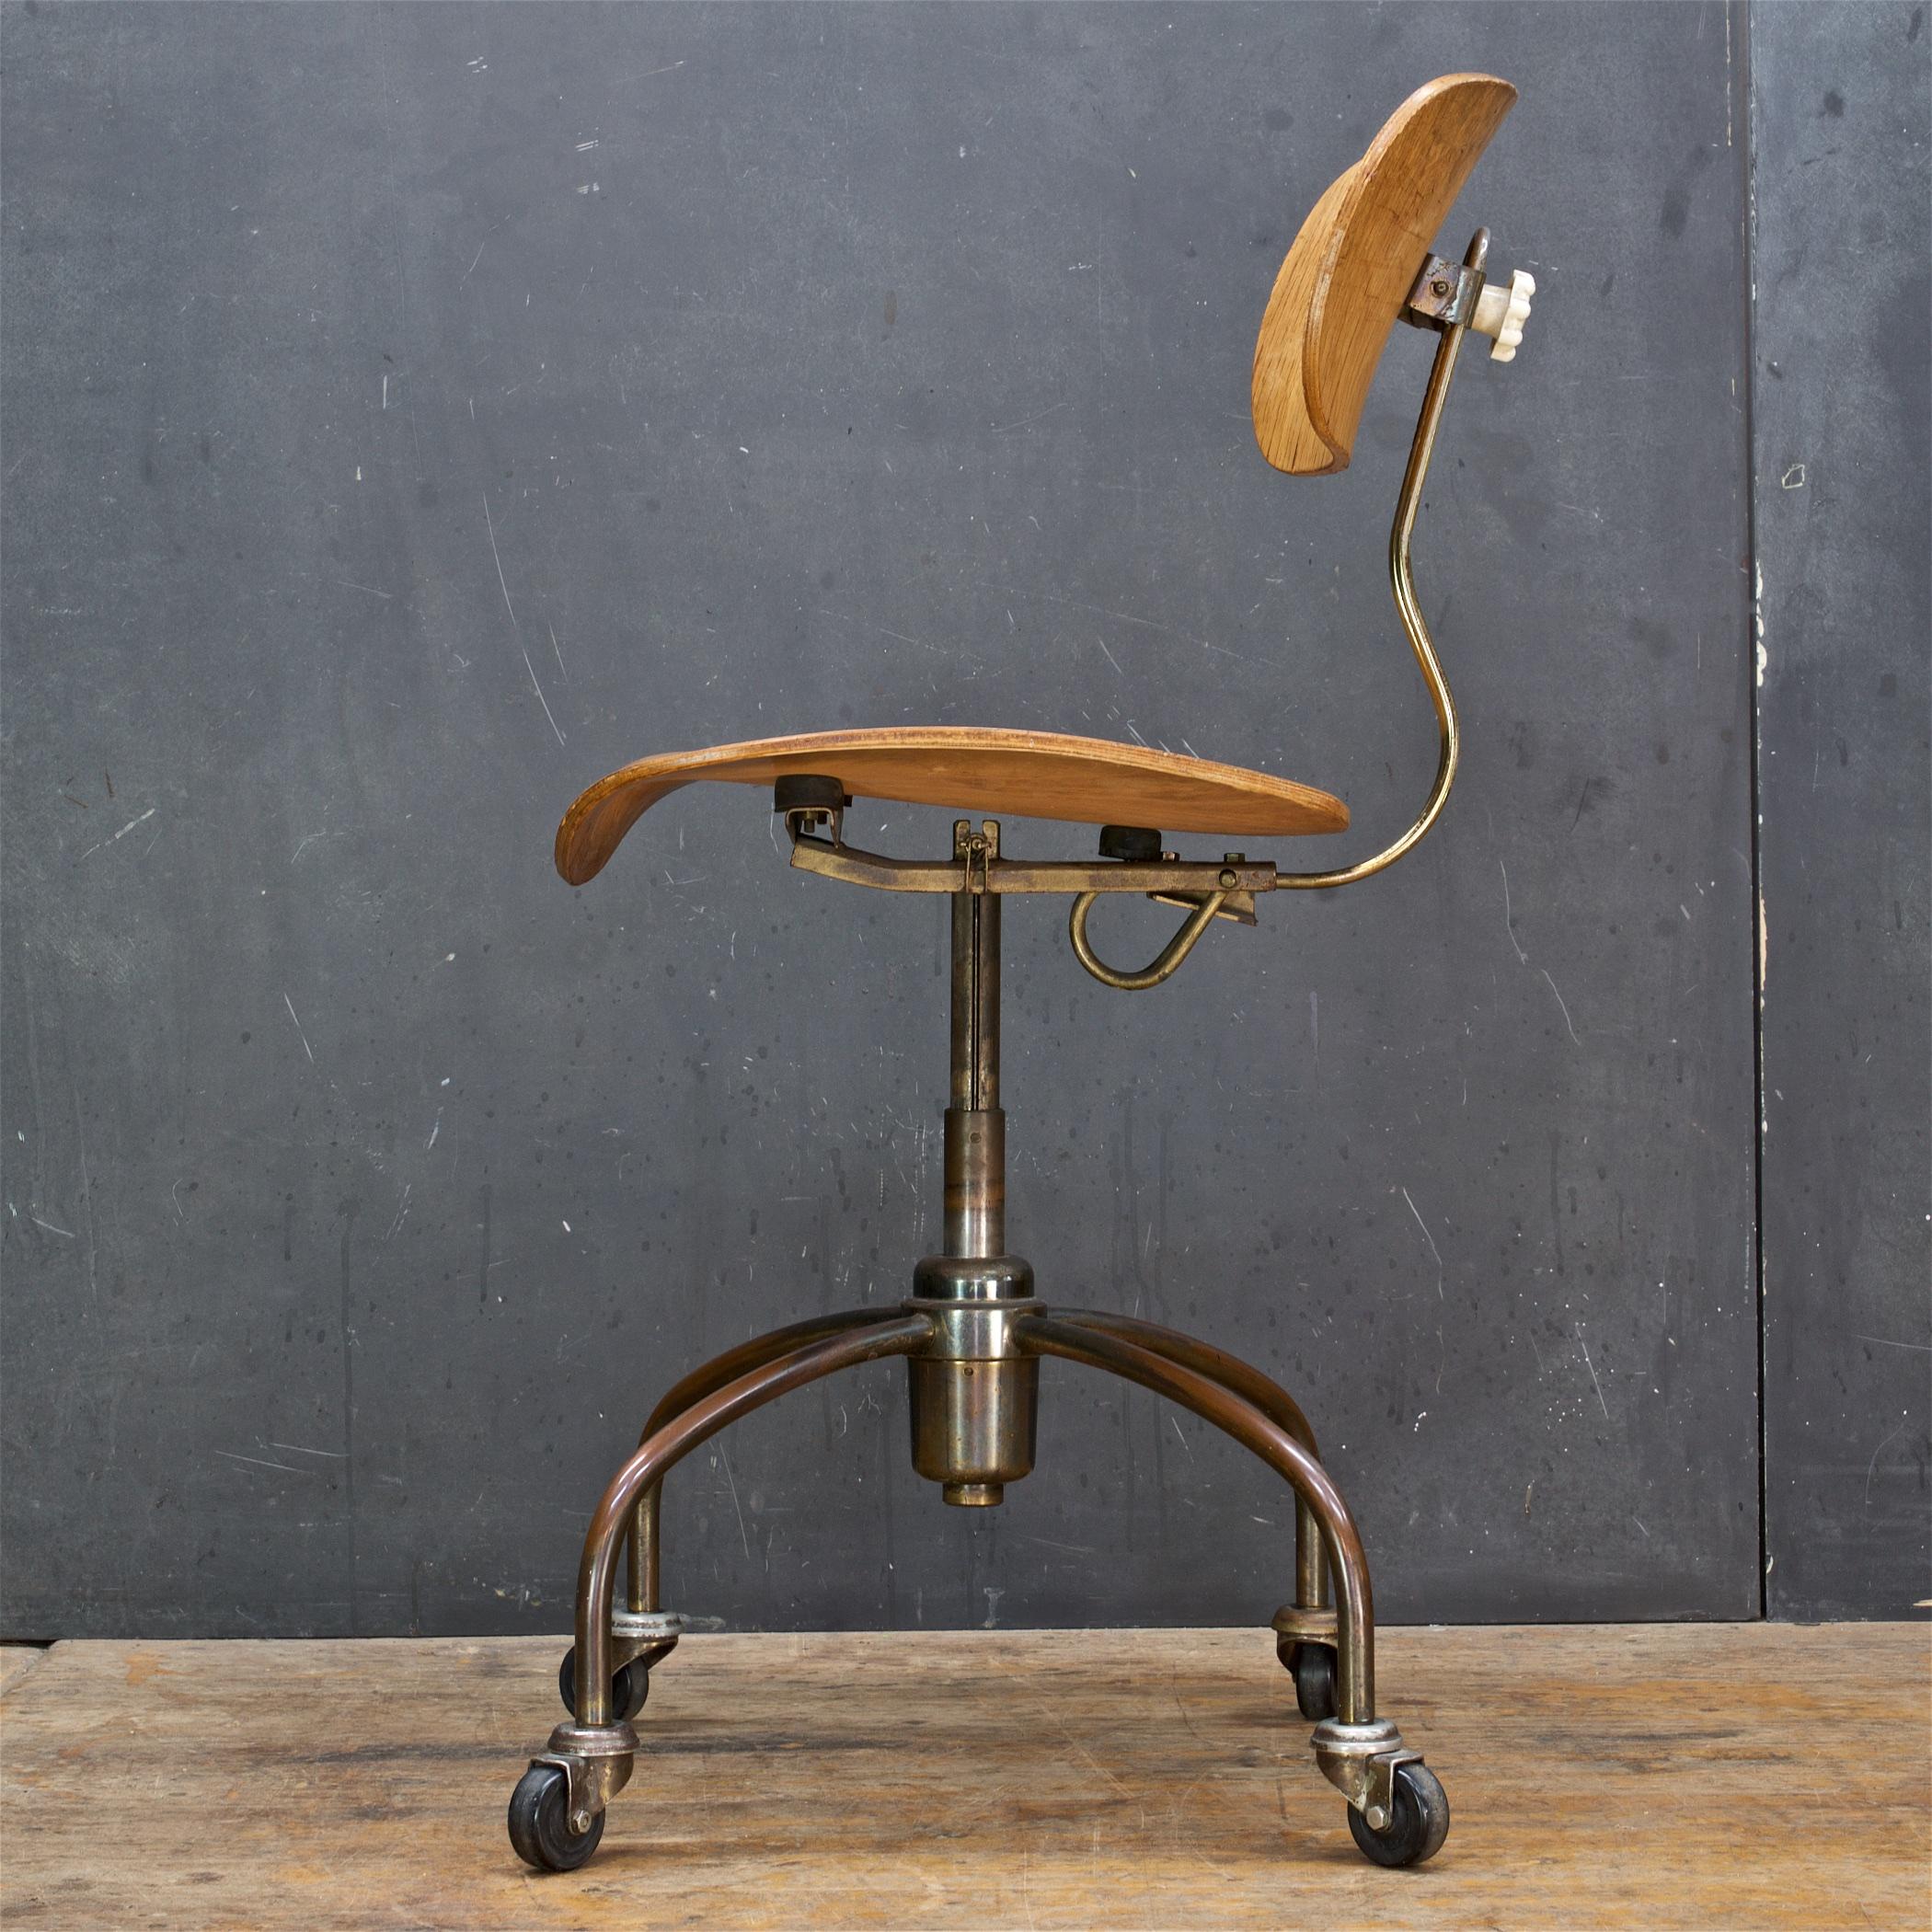 This chair has a rich patina to all surfaces. The worn chrome-plating on the base has revealed a beautiful copper layer which really looks amazing. Adjustable seat height and backrest height. A functioning spring/shock mechanism in the center of the